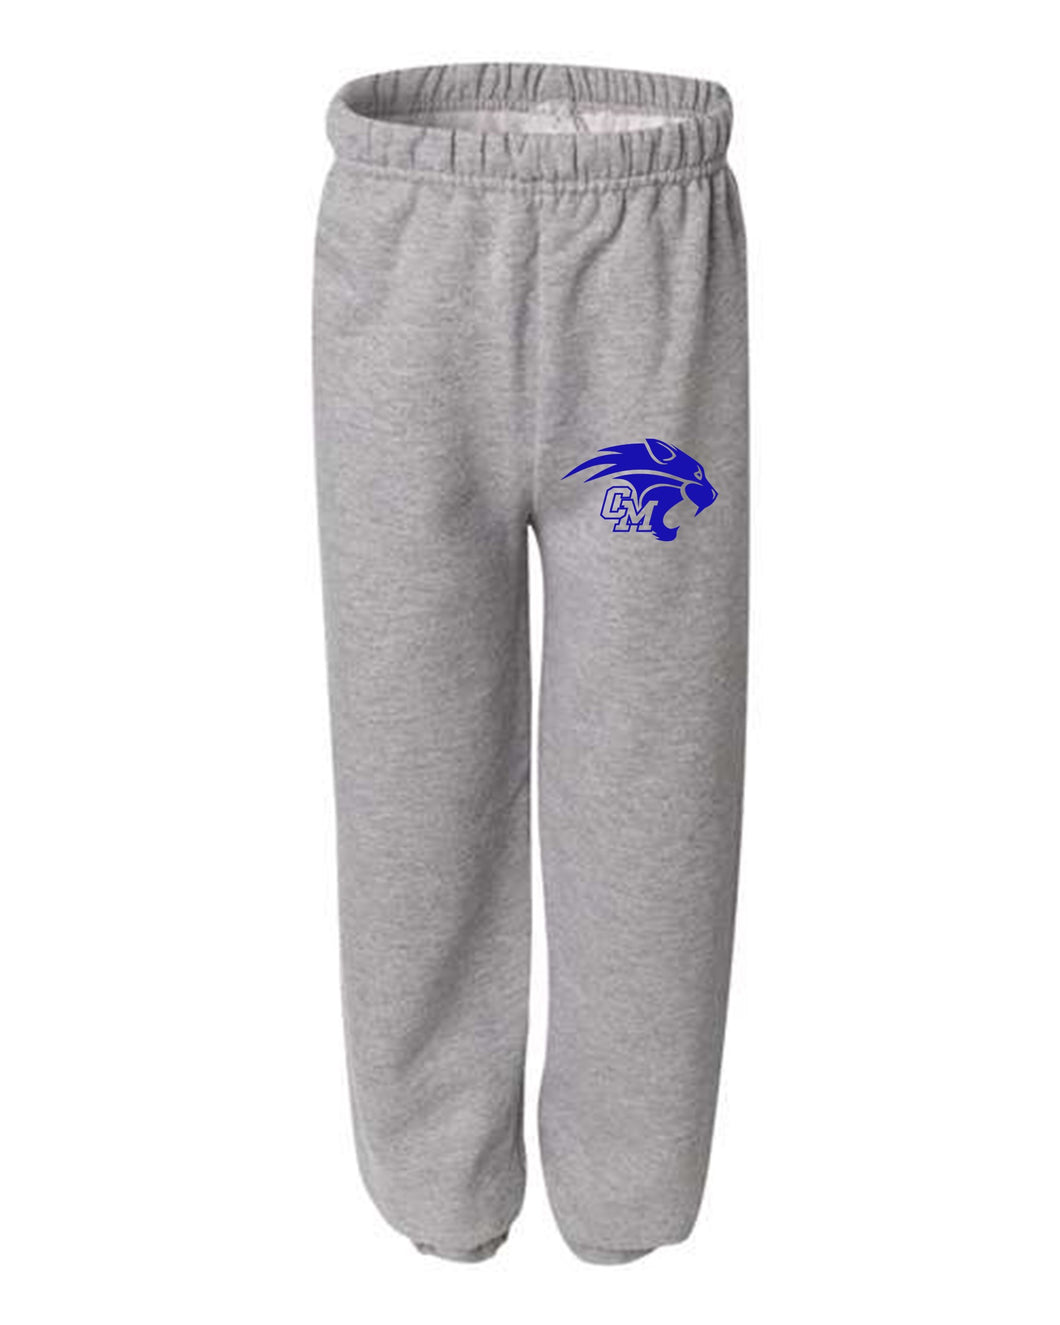 Central Mountain Wildcat Wrestling Sweatpants - Click for Additional Styles (Youth and Adult)